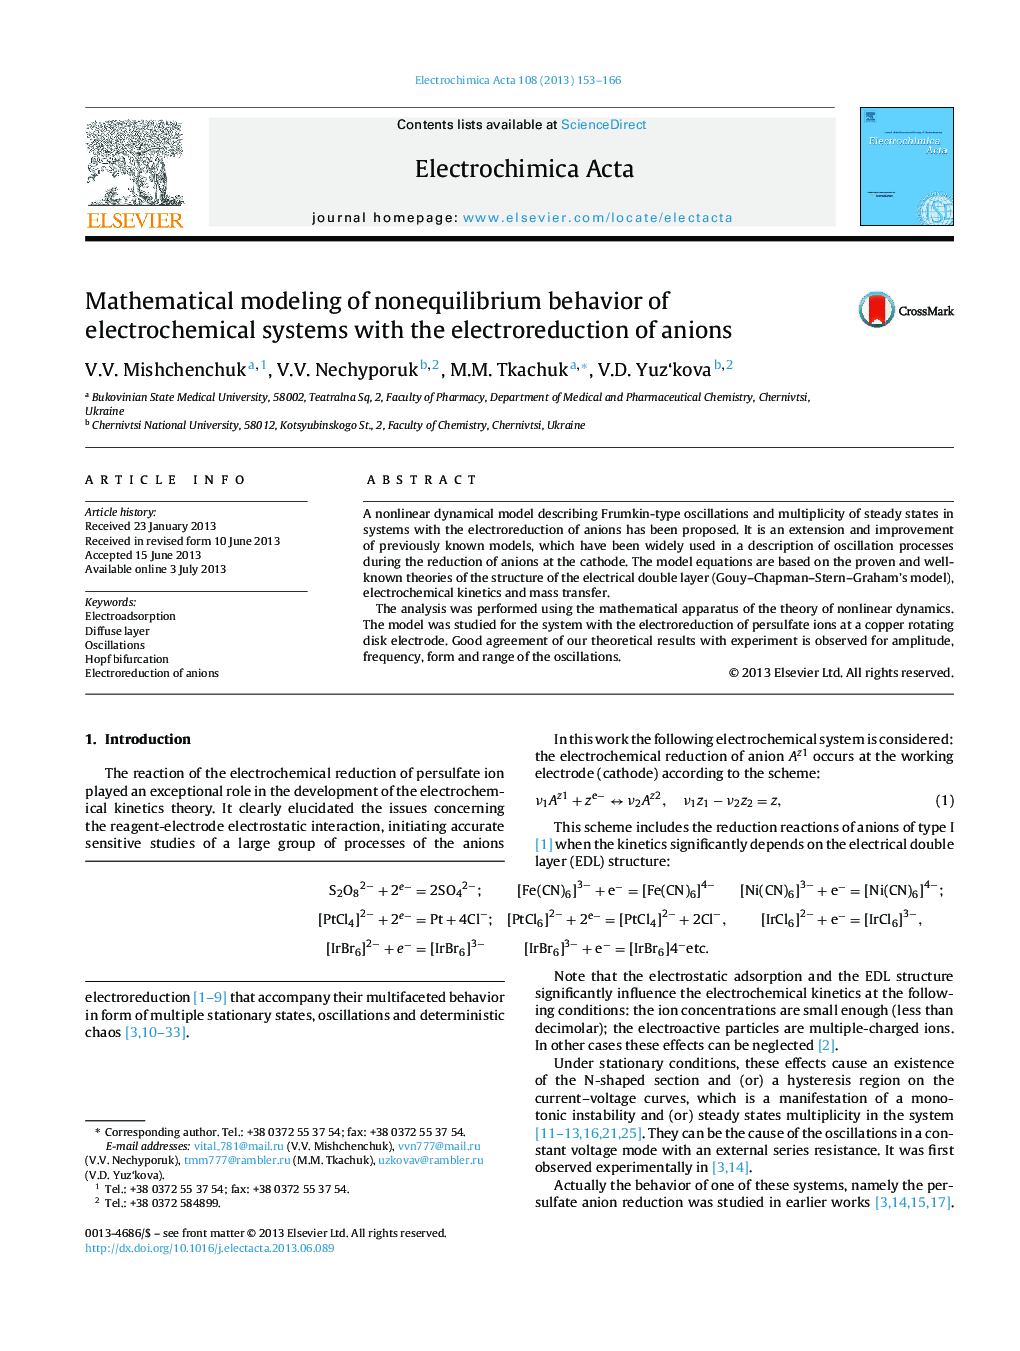 Mathematical modeling of nonequilibrium behavior of electrochemical systems with the electroreduction of anions